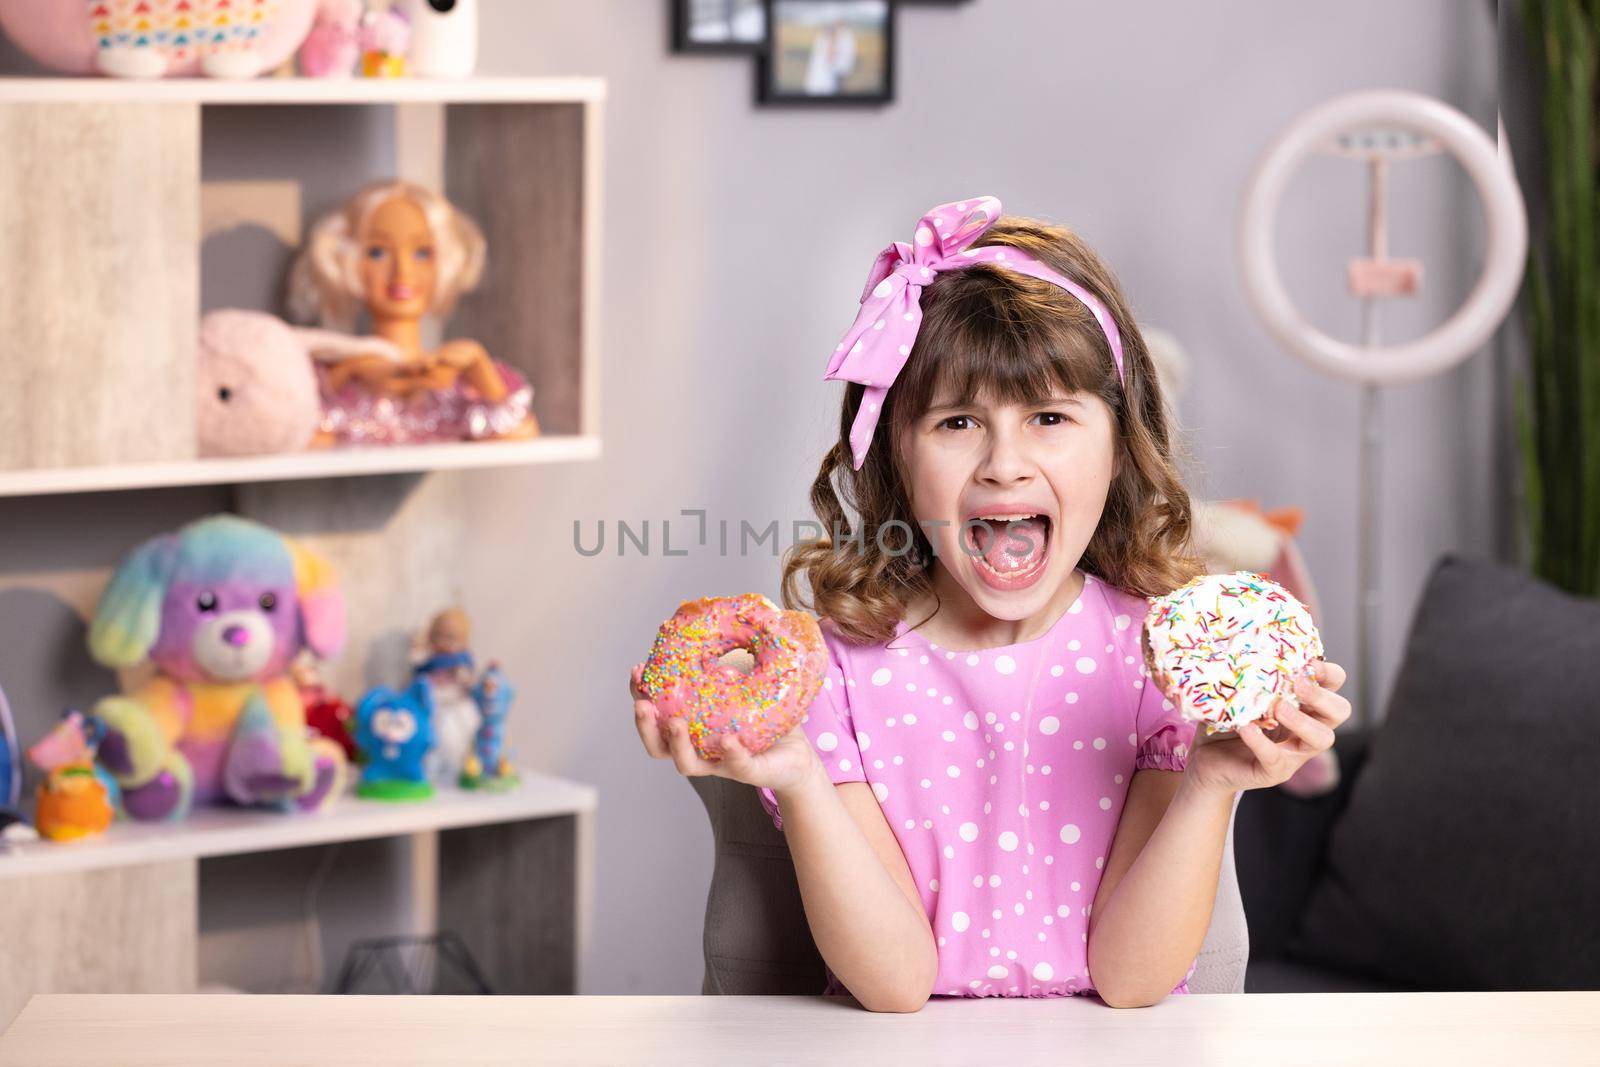 Cute adolescent school girl plays with sweet donuts doing happy fun face expressions on background. Little girl in pink dress holding two donuts in hands by the face. Funny concept with sweets by uflypro